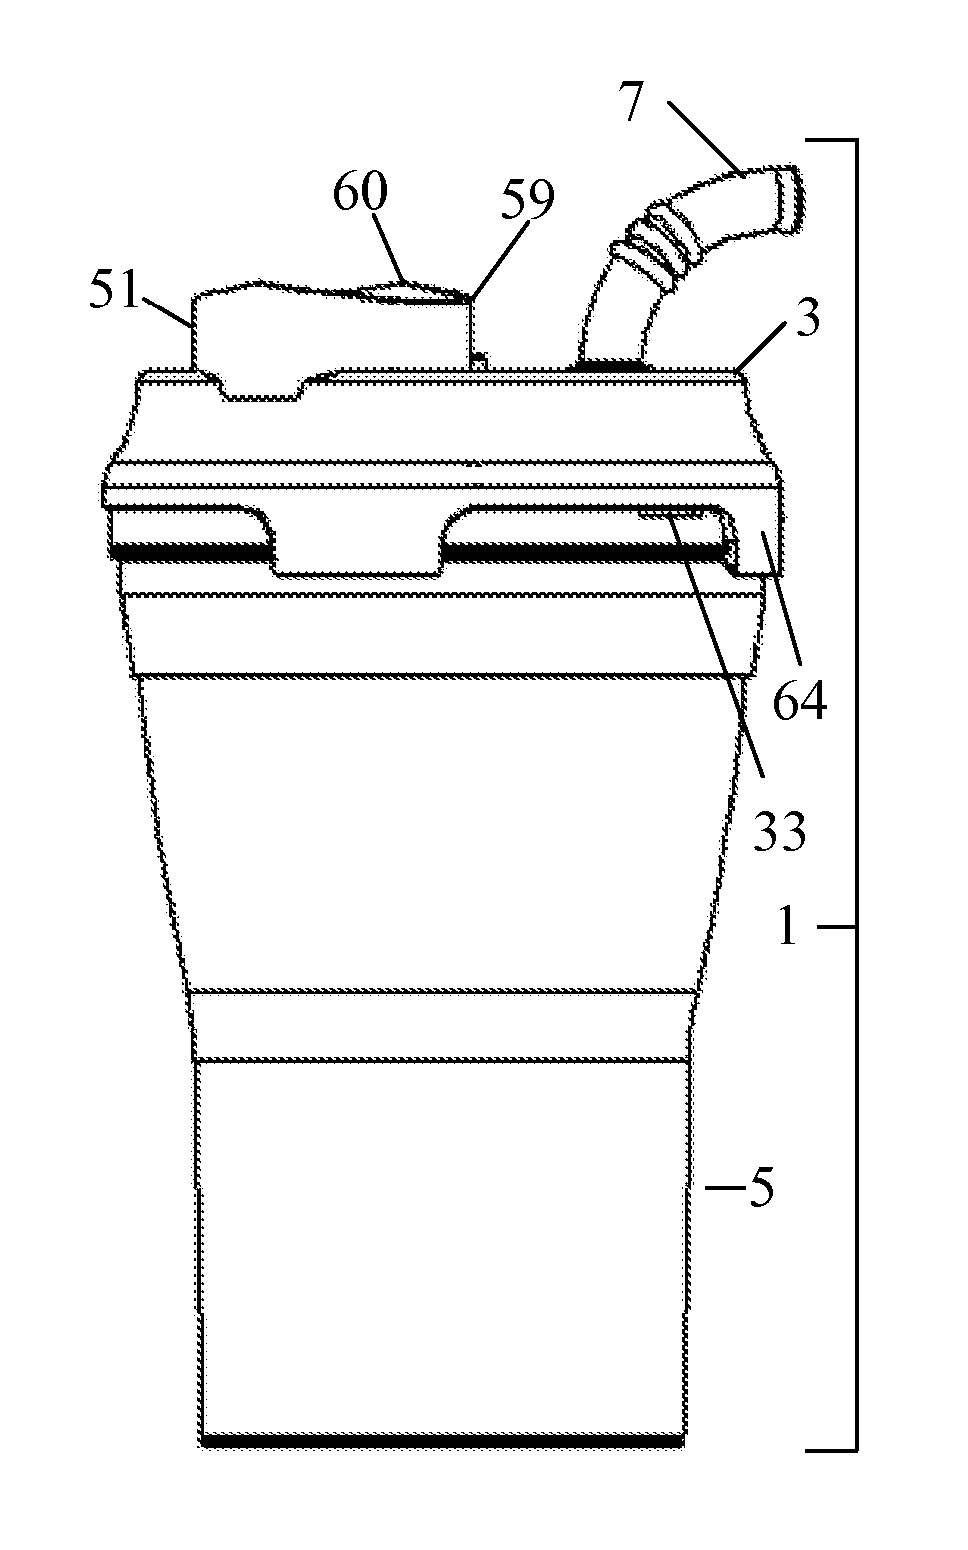 Multi-compartment snack storage and dispensing appliance